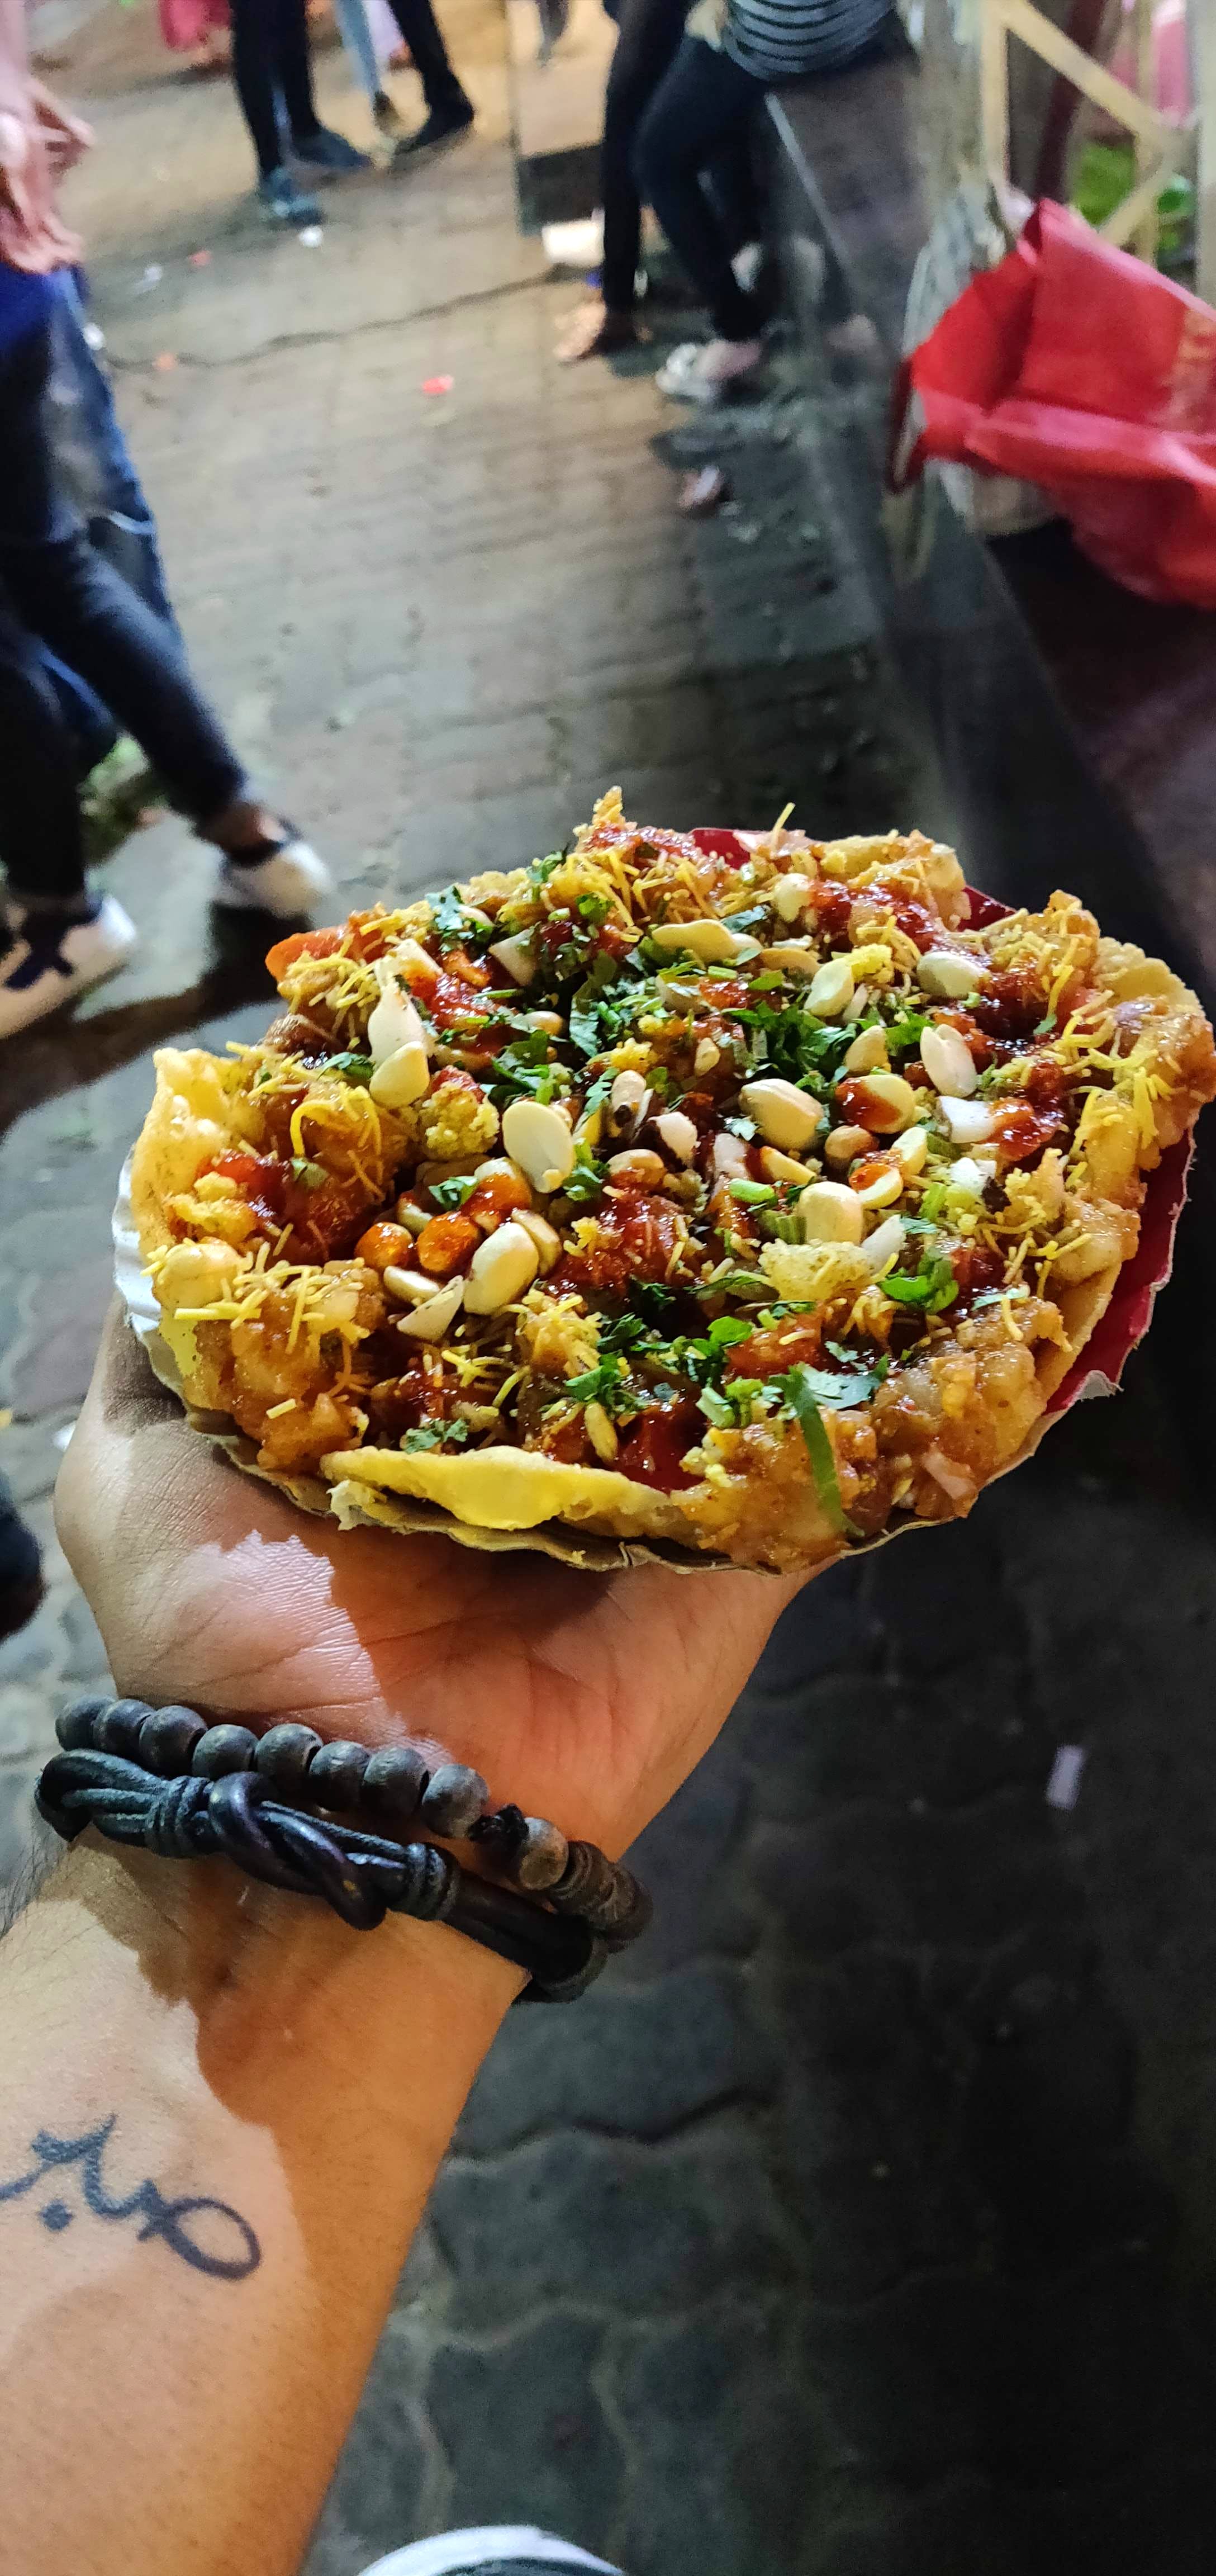 Papdi Chaat - My All Time Favorite Street Food. It'S Tangy And Spicy And Full Of Flavors.
 Must Try